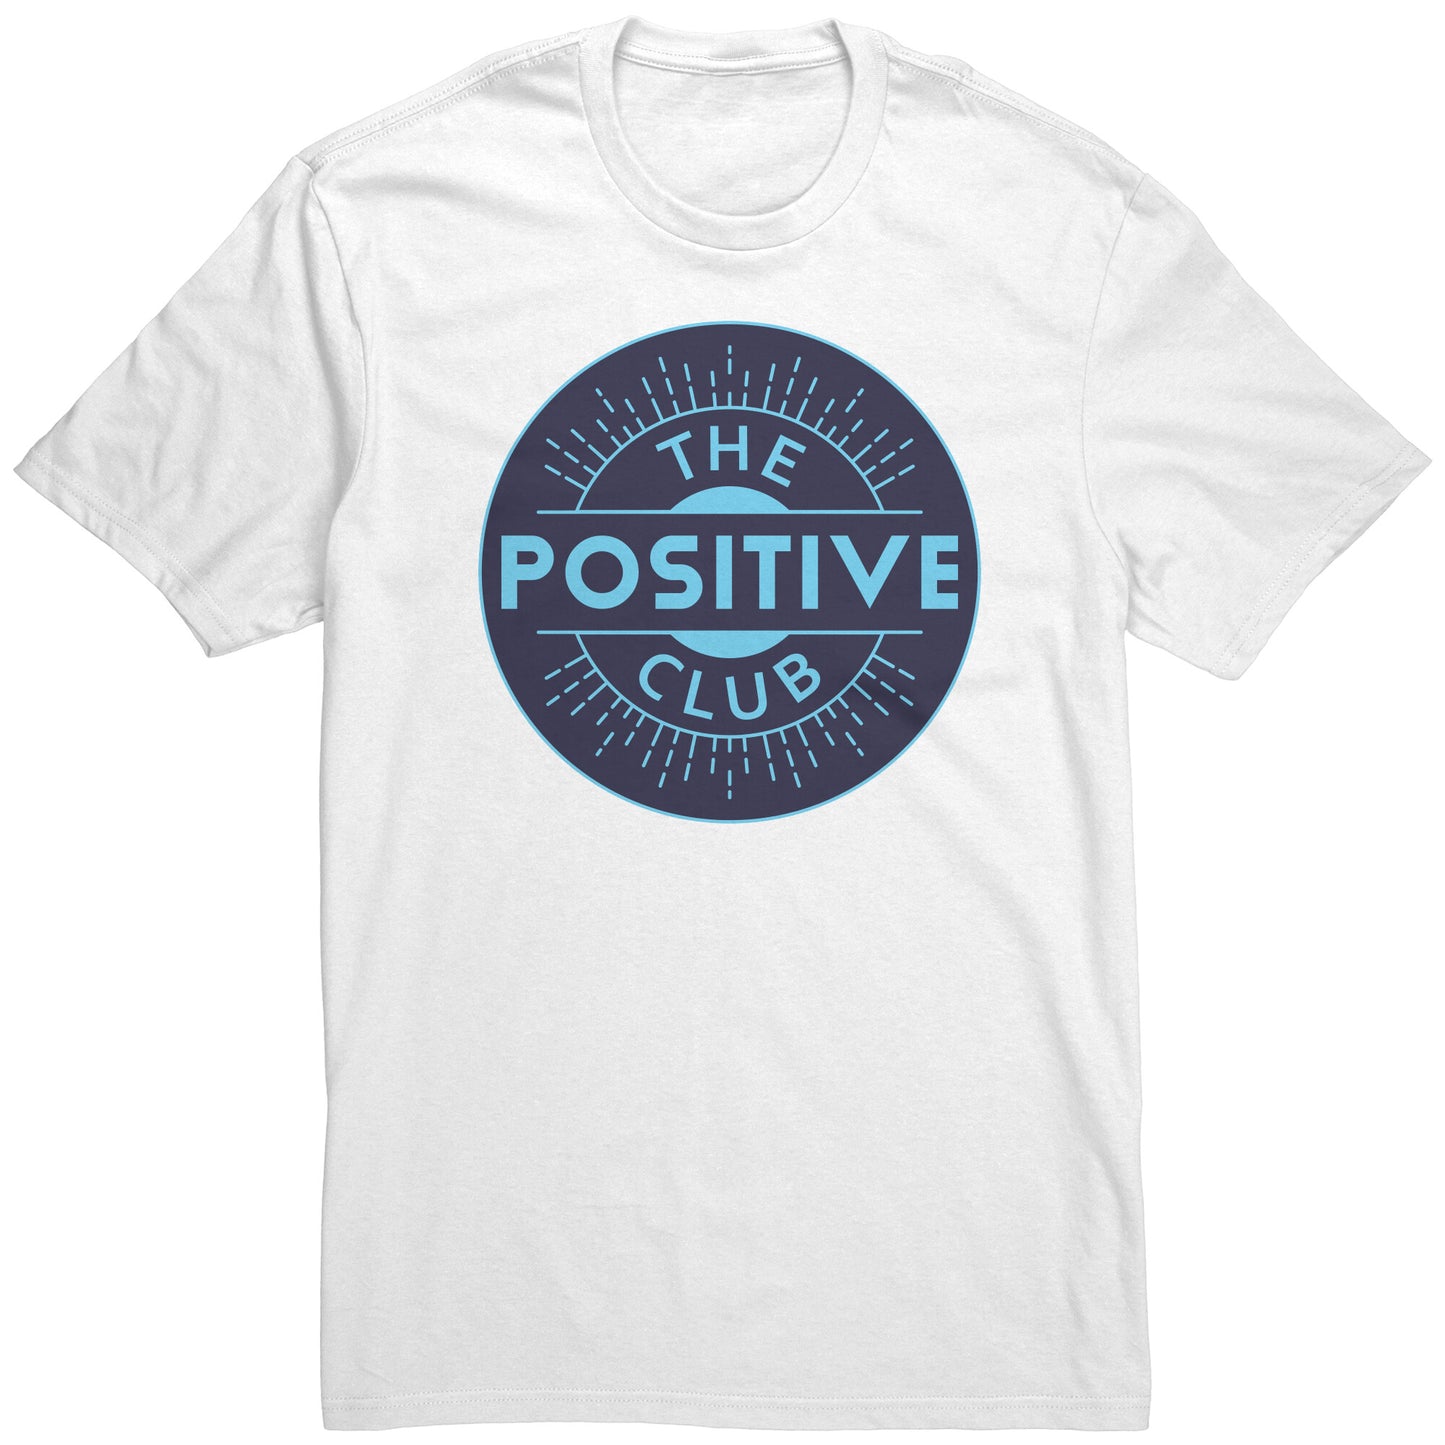 Unisex shirt  The Positive Club ( Free Shipping )